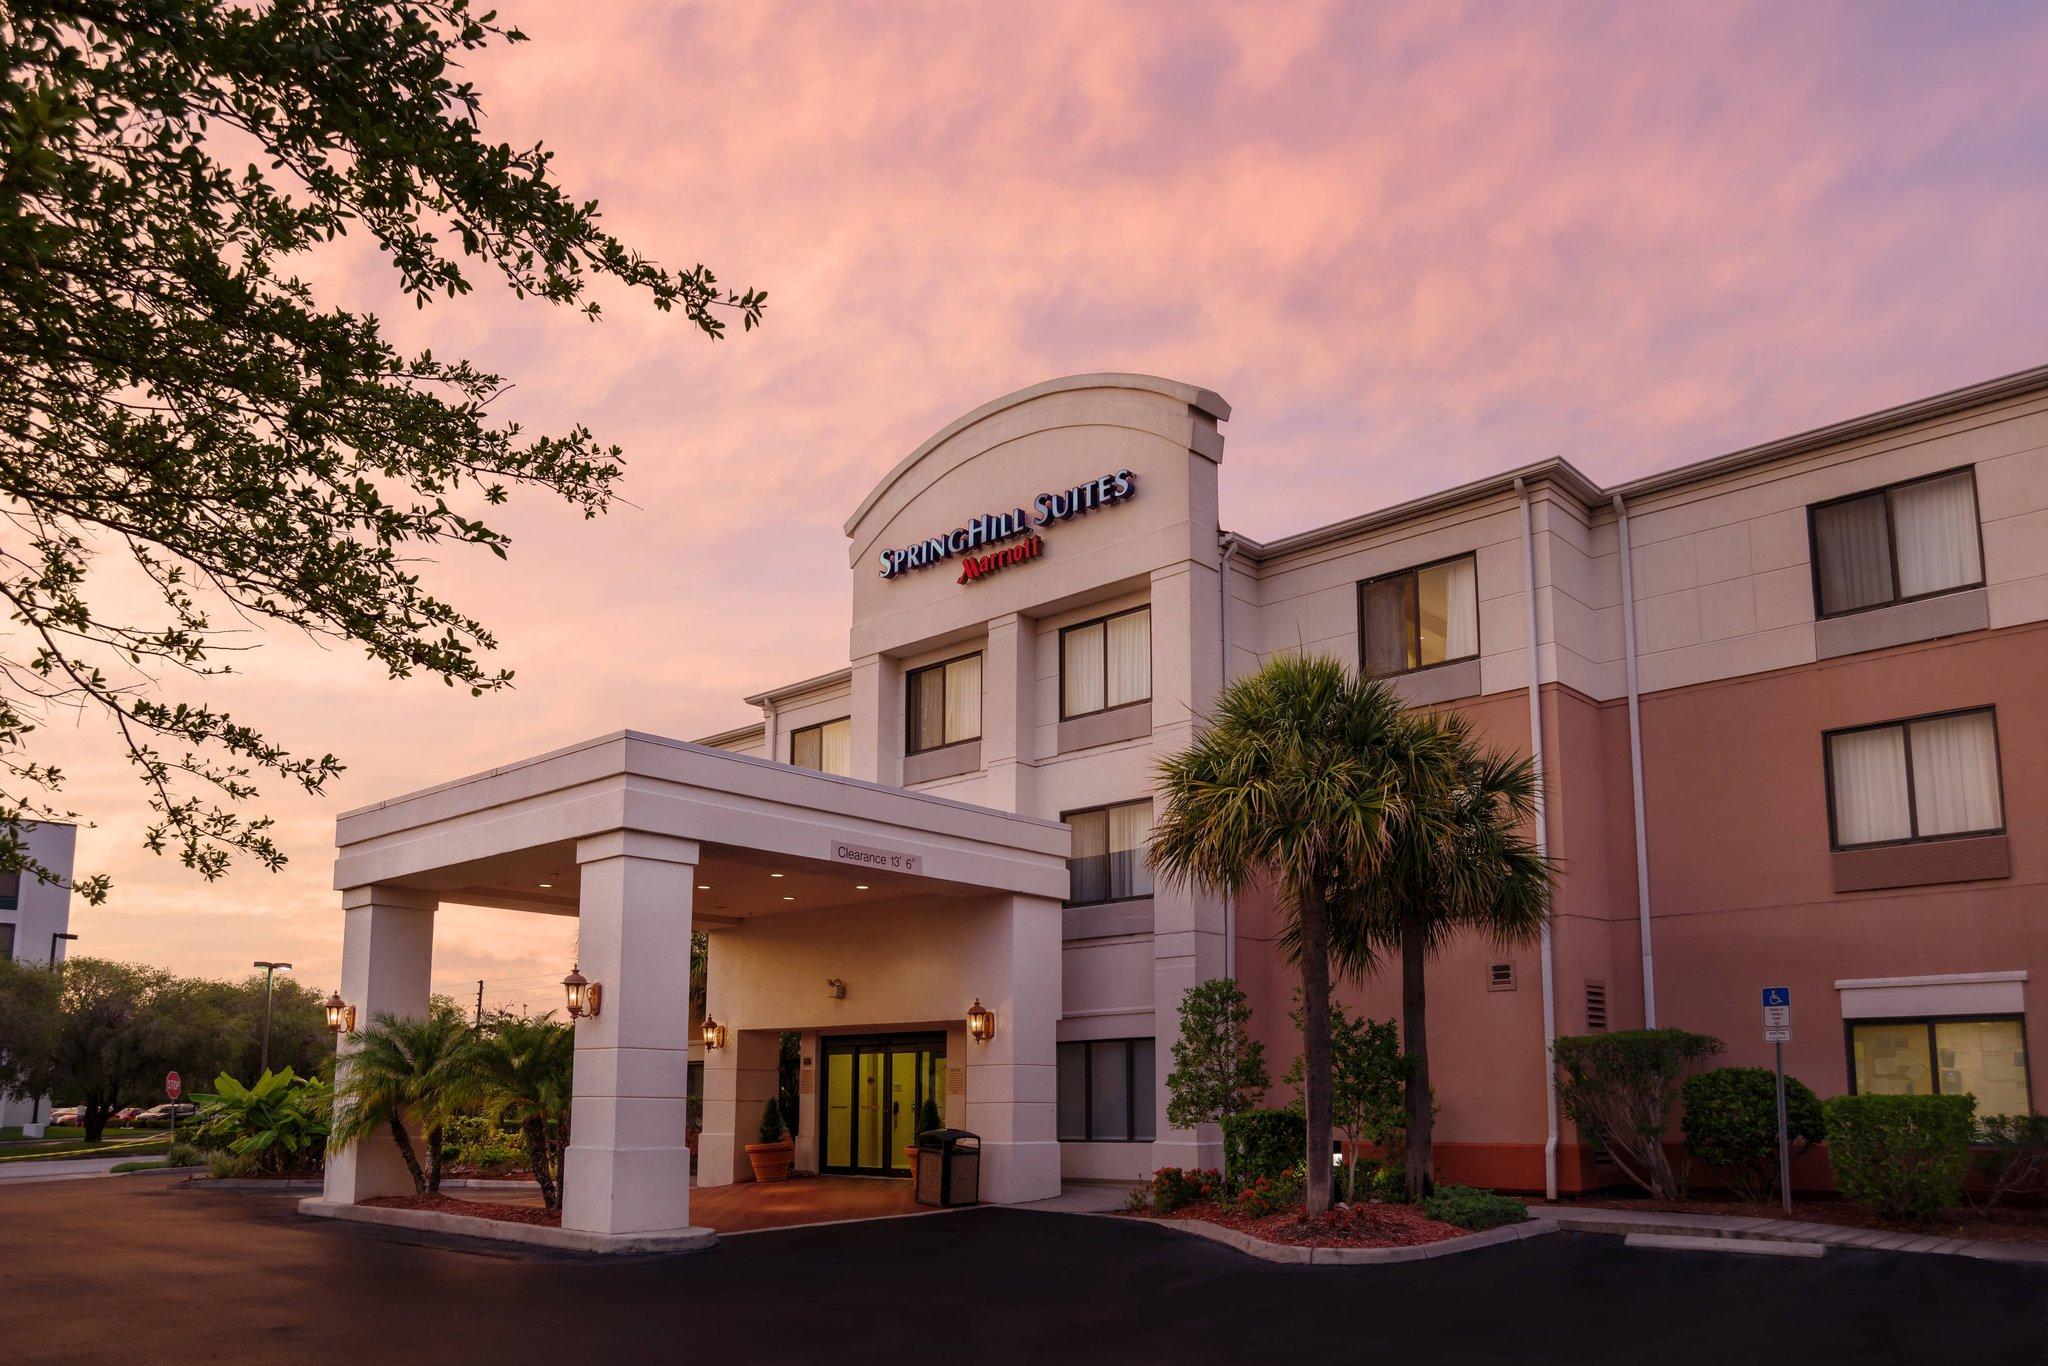 SpringHill Suites St. Petersburg Clearwater in Clearwater, FL